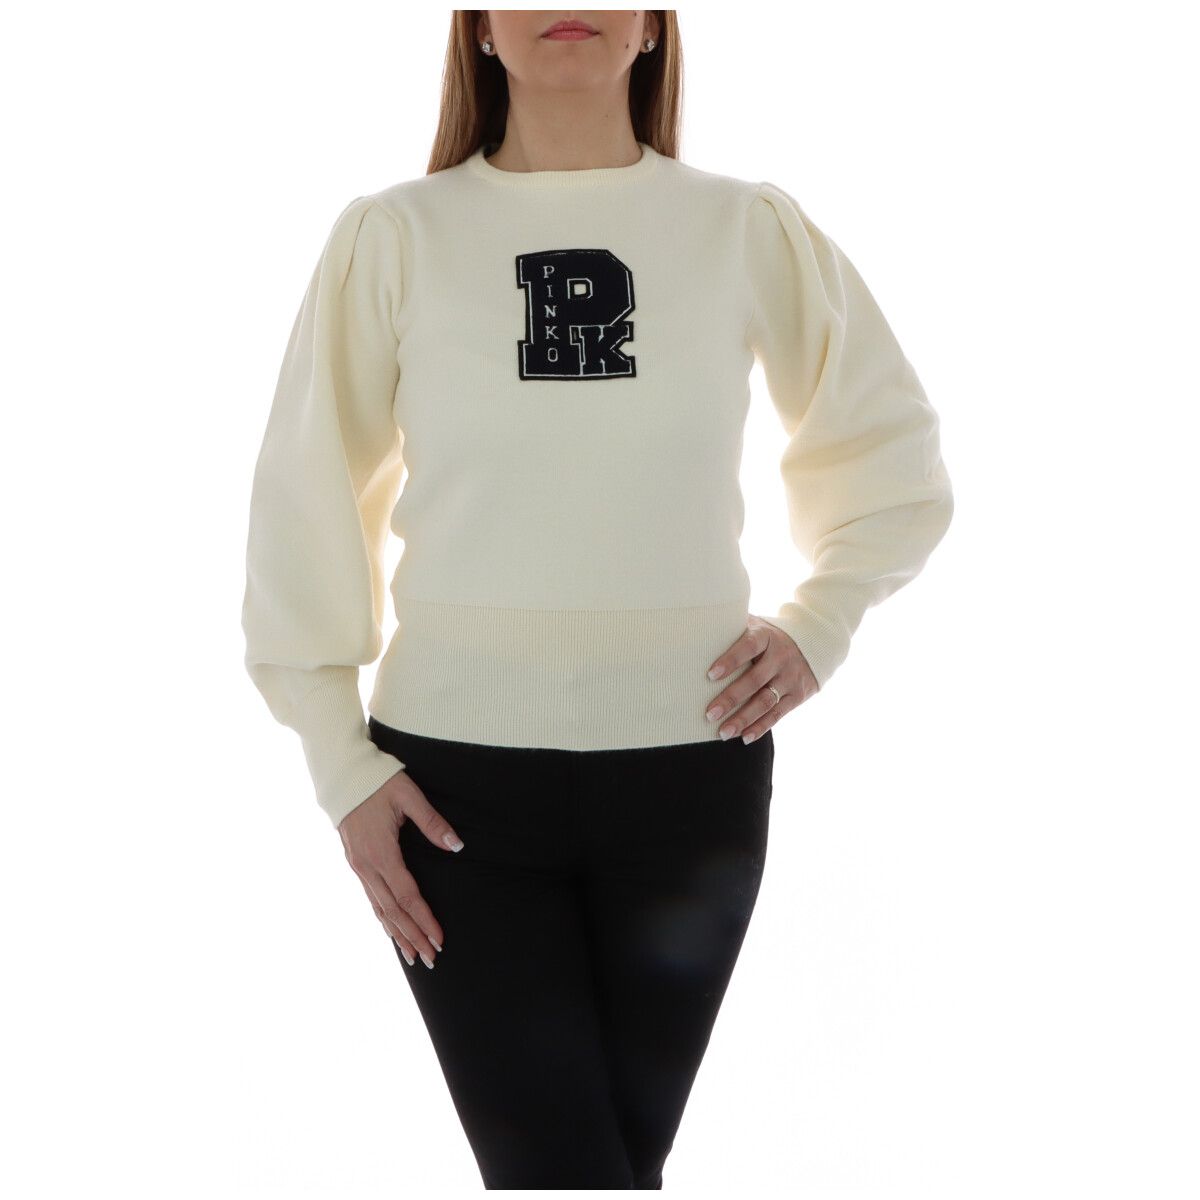 Brand: Pinko
Gender: Women
Type: Knitwear
Season: Fall/Winter

PRODUCT DETAIL
• Color: white
• Sleeves: long
• Neckline: round neck
•  Article code: 1N132C Y7CR

COMPOSITION AND MATERIAL
• Composition: -34% polyamide -23% polyester -43% viscose 
•  Washing: handwash